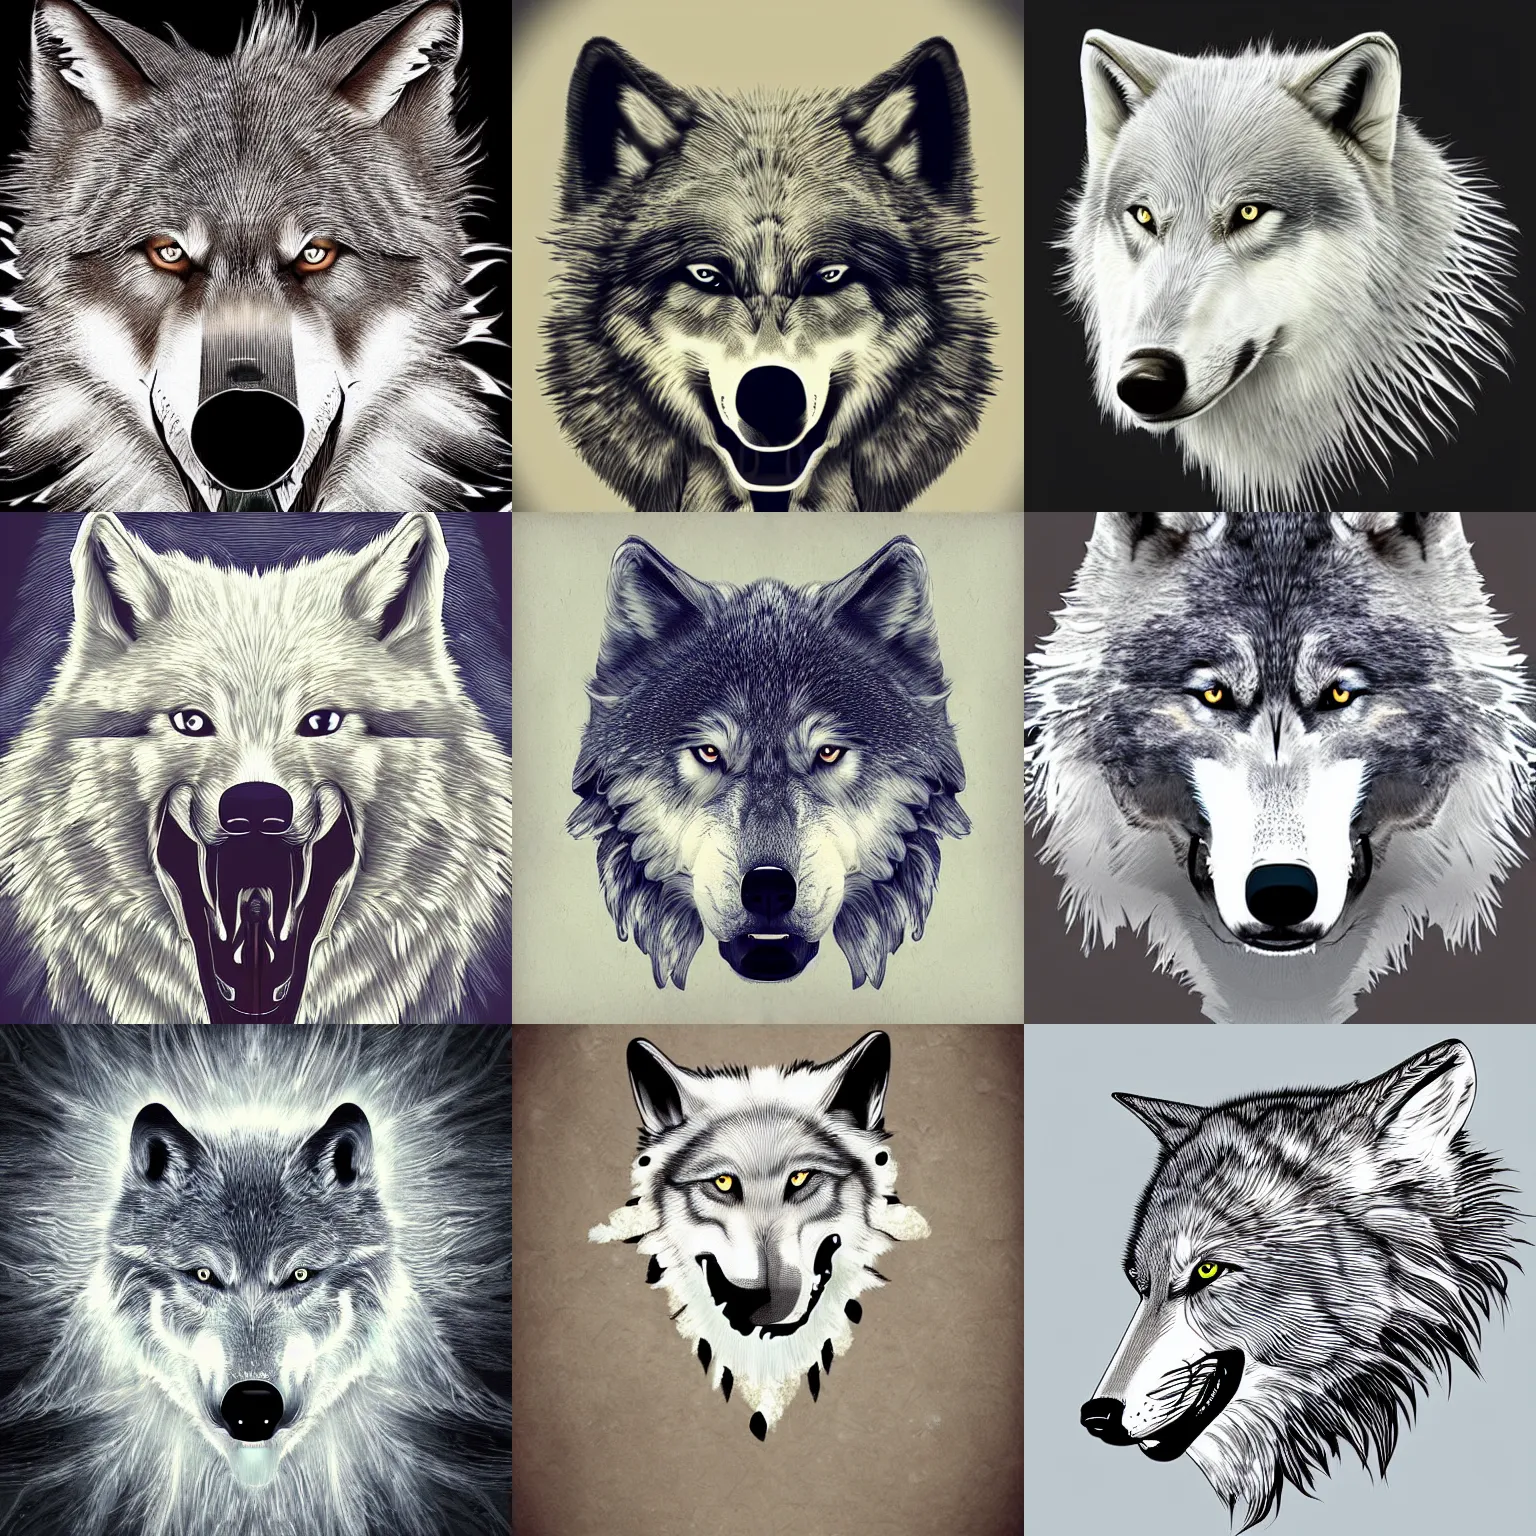 Prompt: a cool aggressive wolf head artwork digital illustration made of ivory feathers and lace